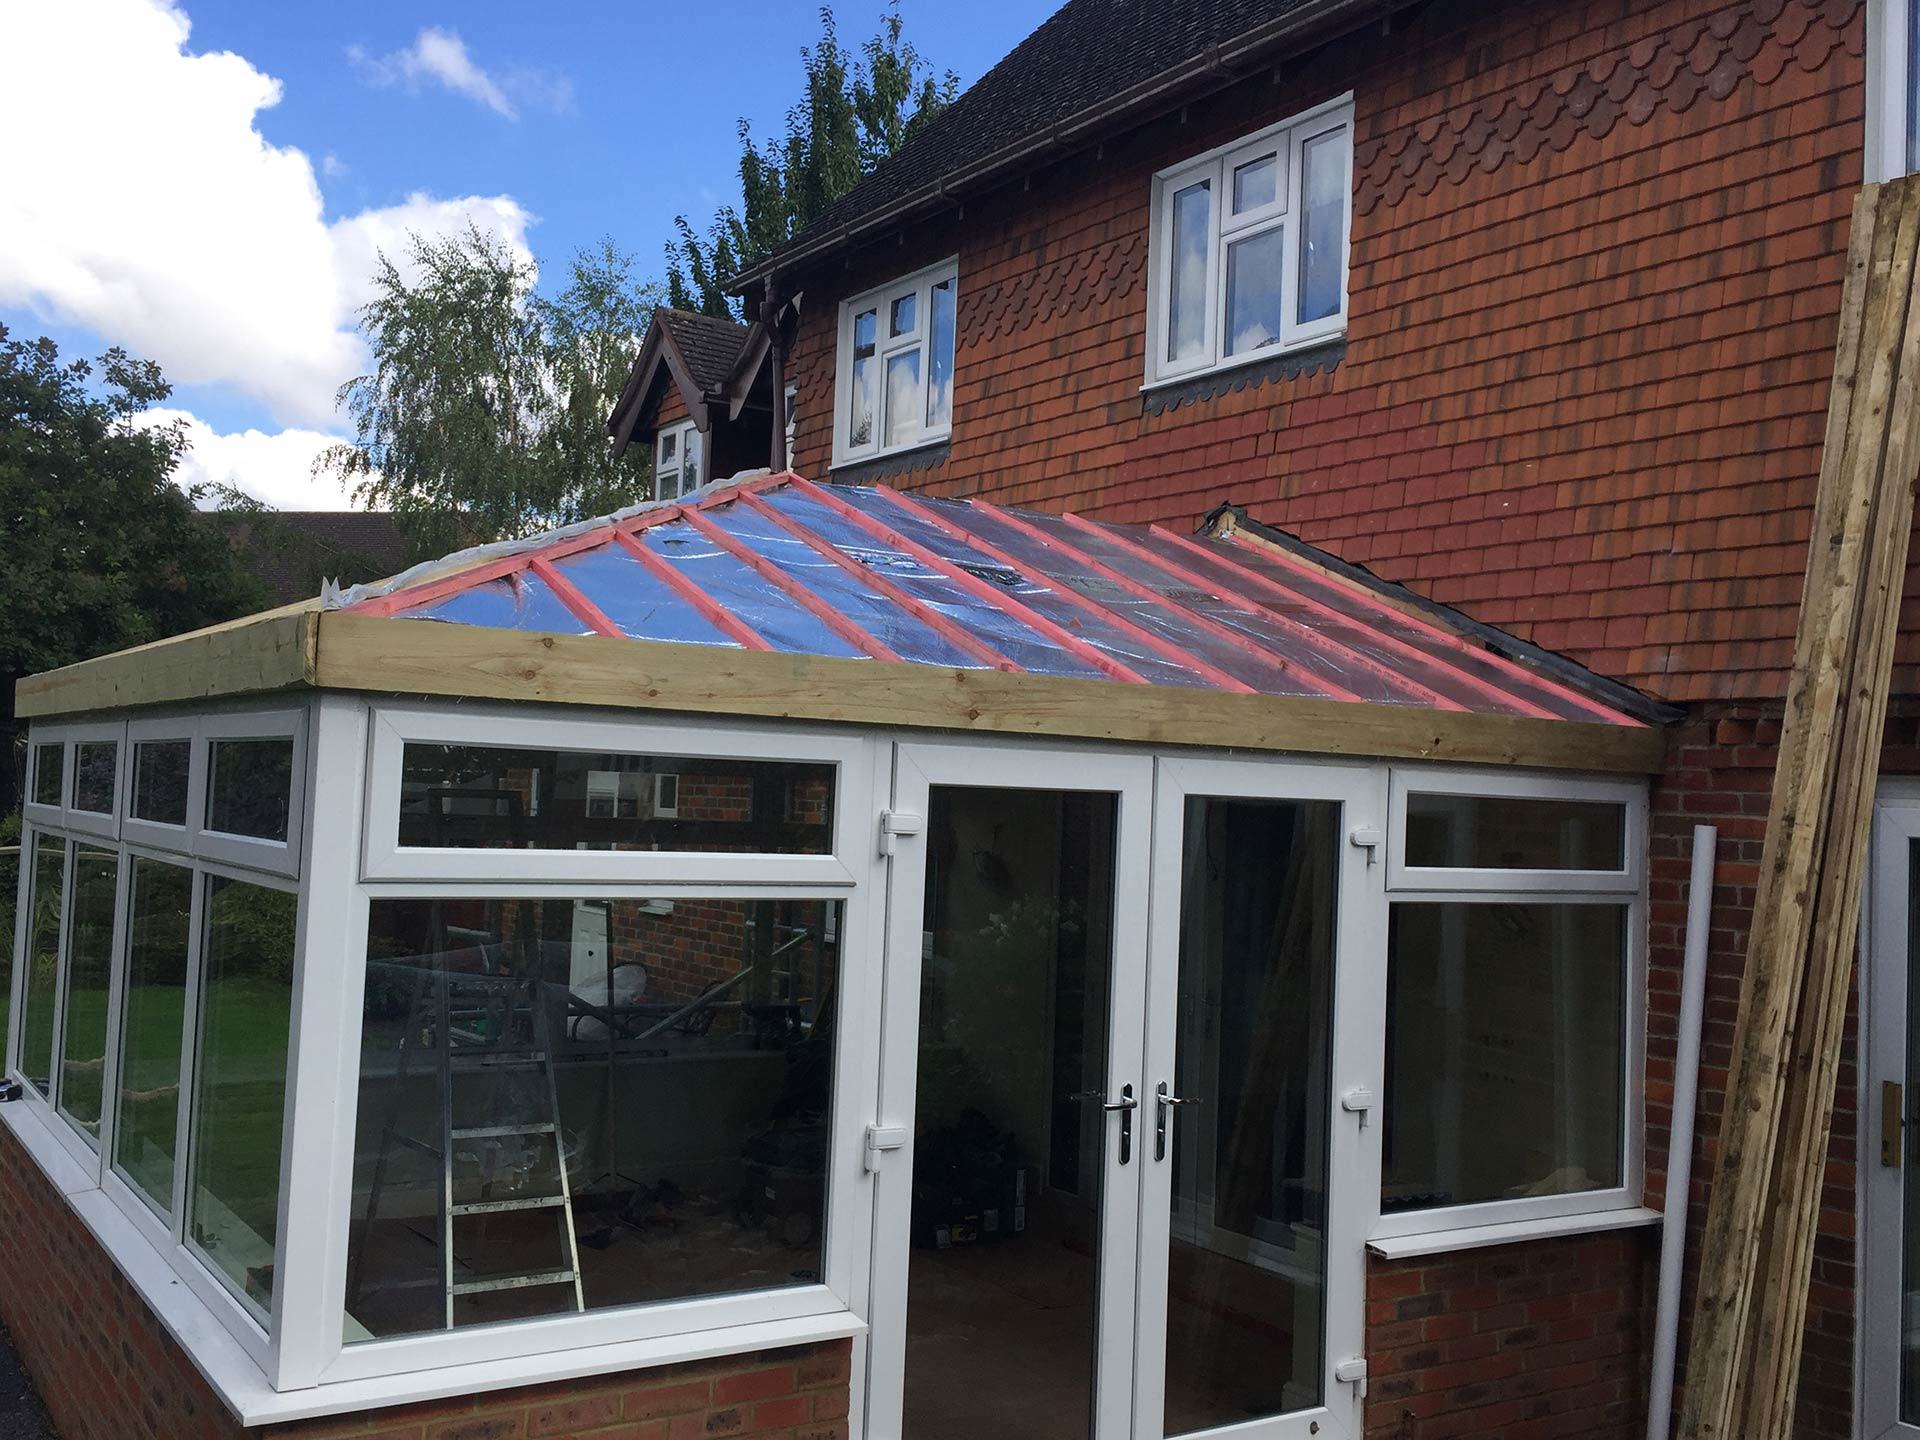 New conservatory roof Northamptonshire